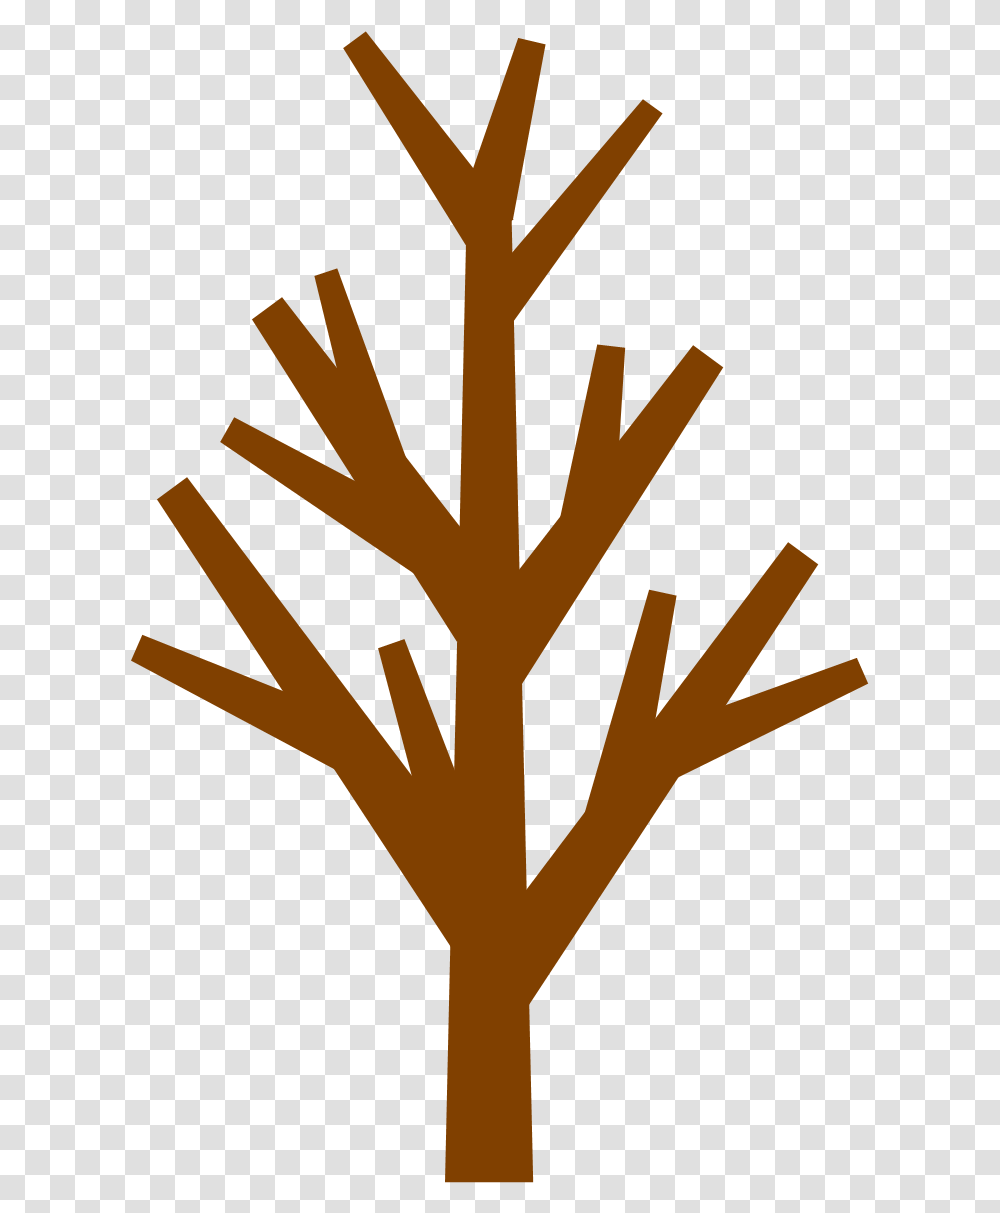 Library Of Bare Tree Files Tree Without Leaves Clip Art, Cross, Symbol, Outdoors, Nature Transparent Png